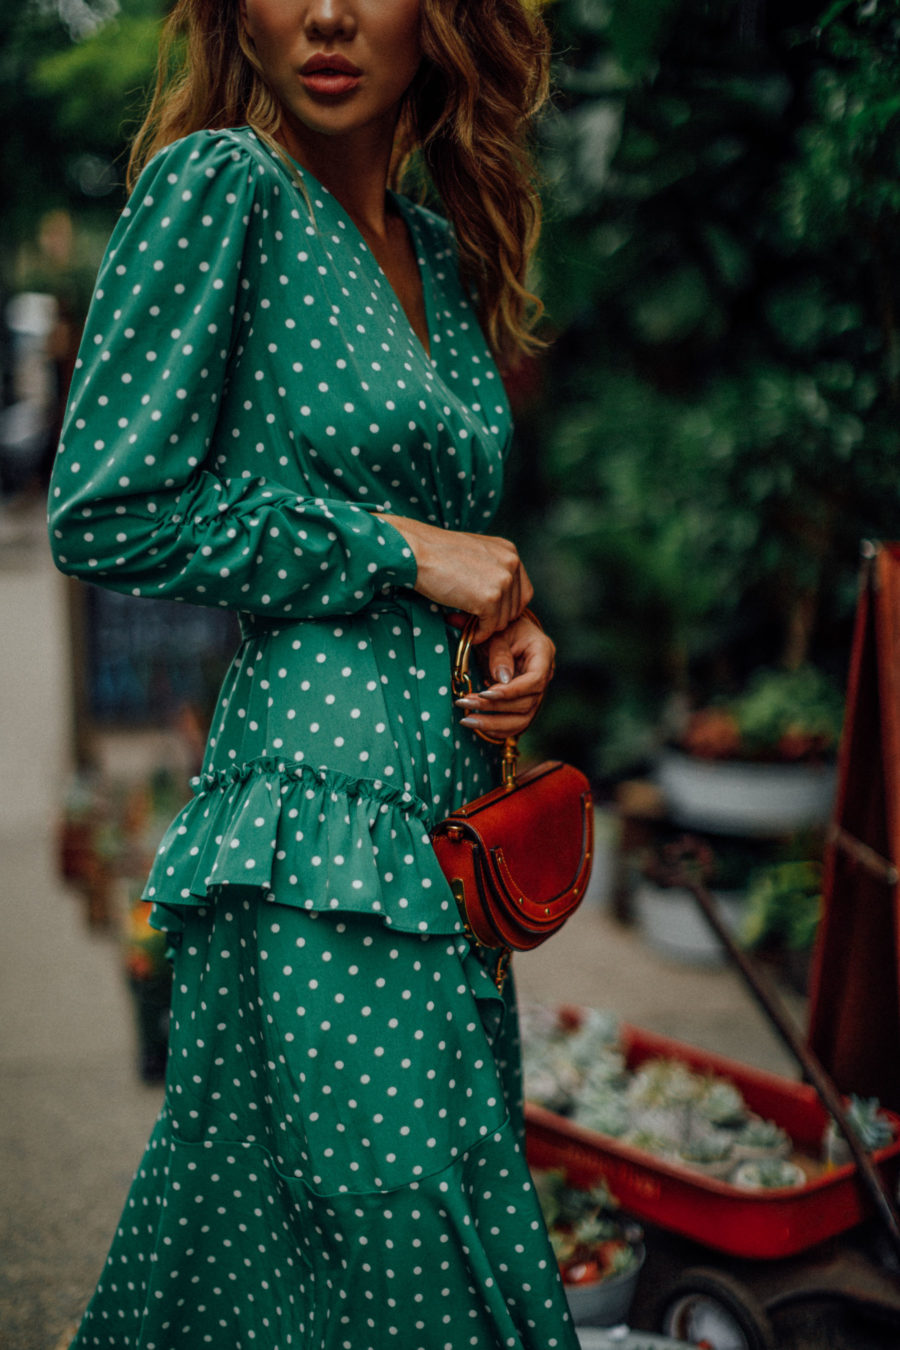 The Only 3 Wedding Guest Outfits You Need This Summer - Green Polka Dot Dress, Chloe Nile Bracelet bag, Block Heel Sandals, Summer Cocktail Dress // Notjessfashion.com